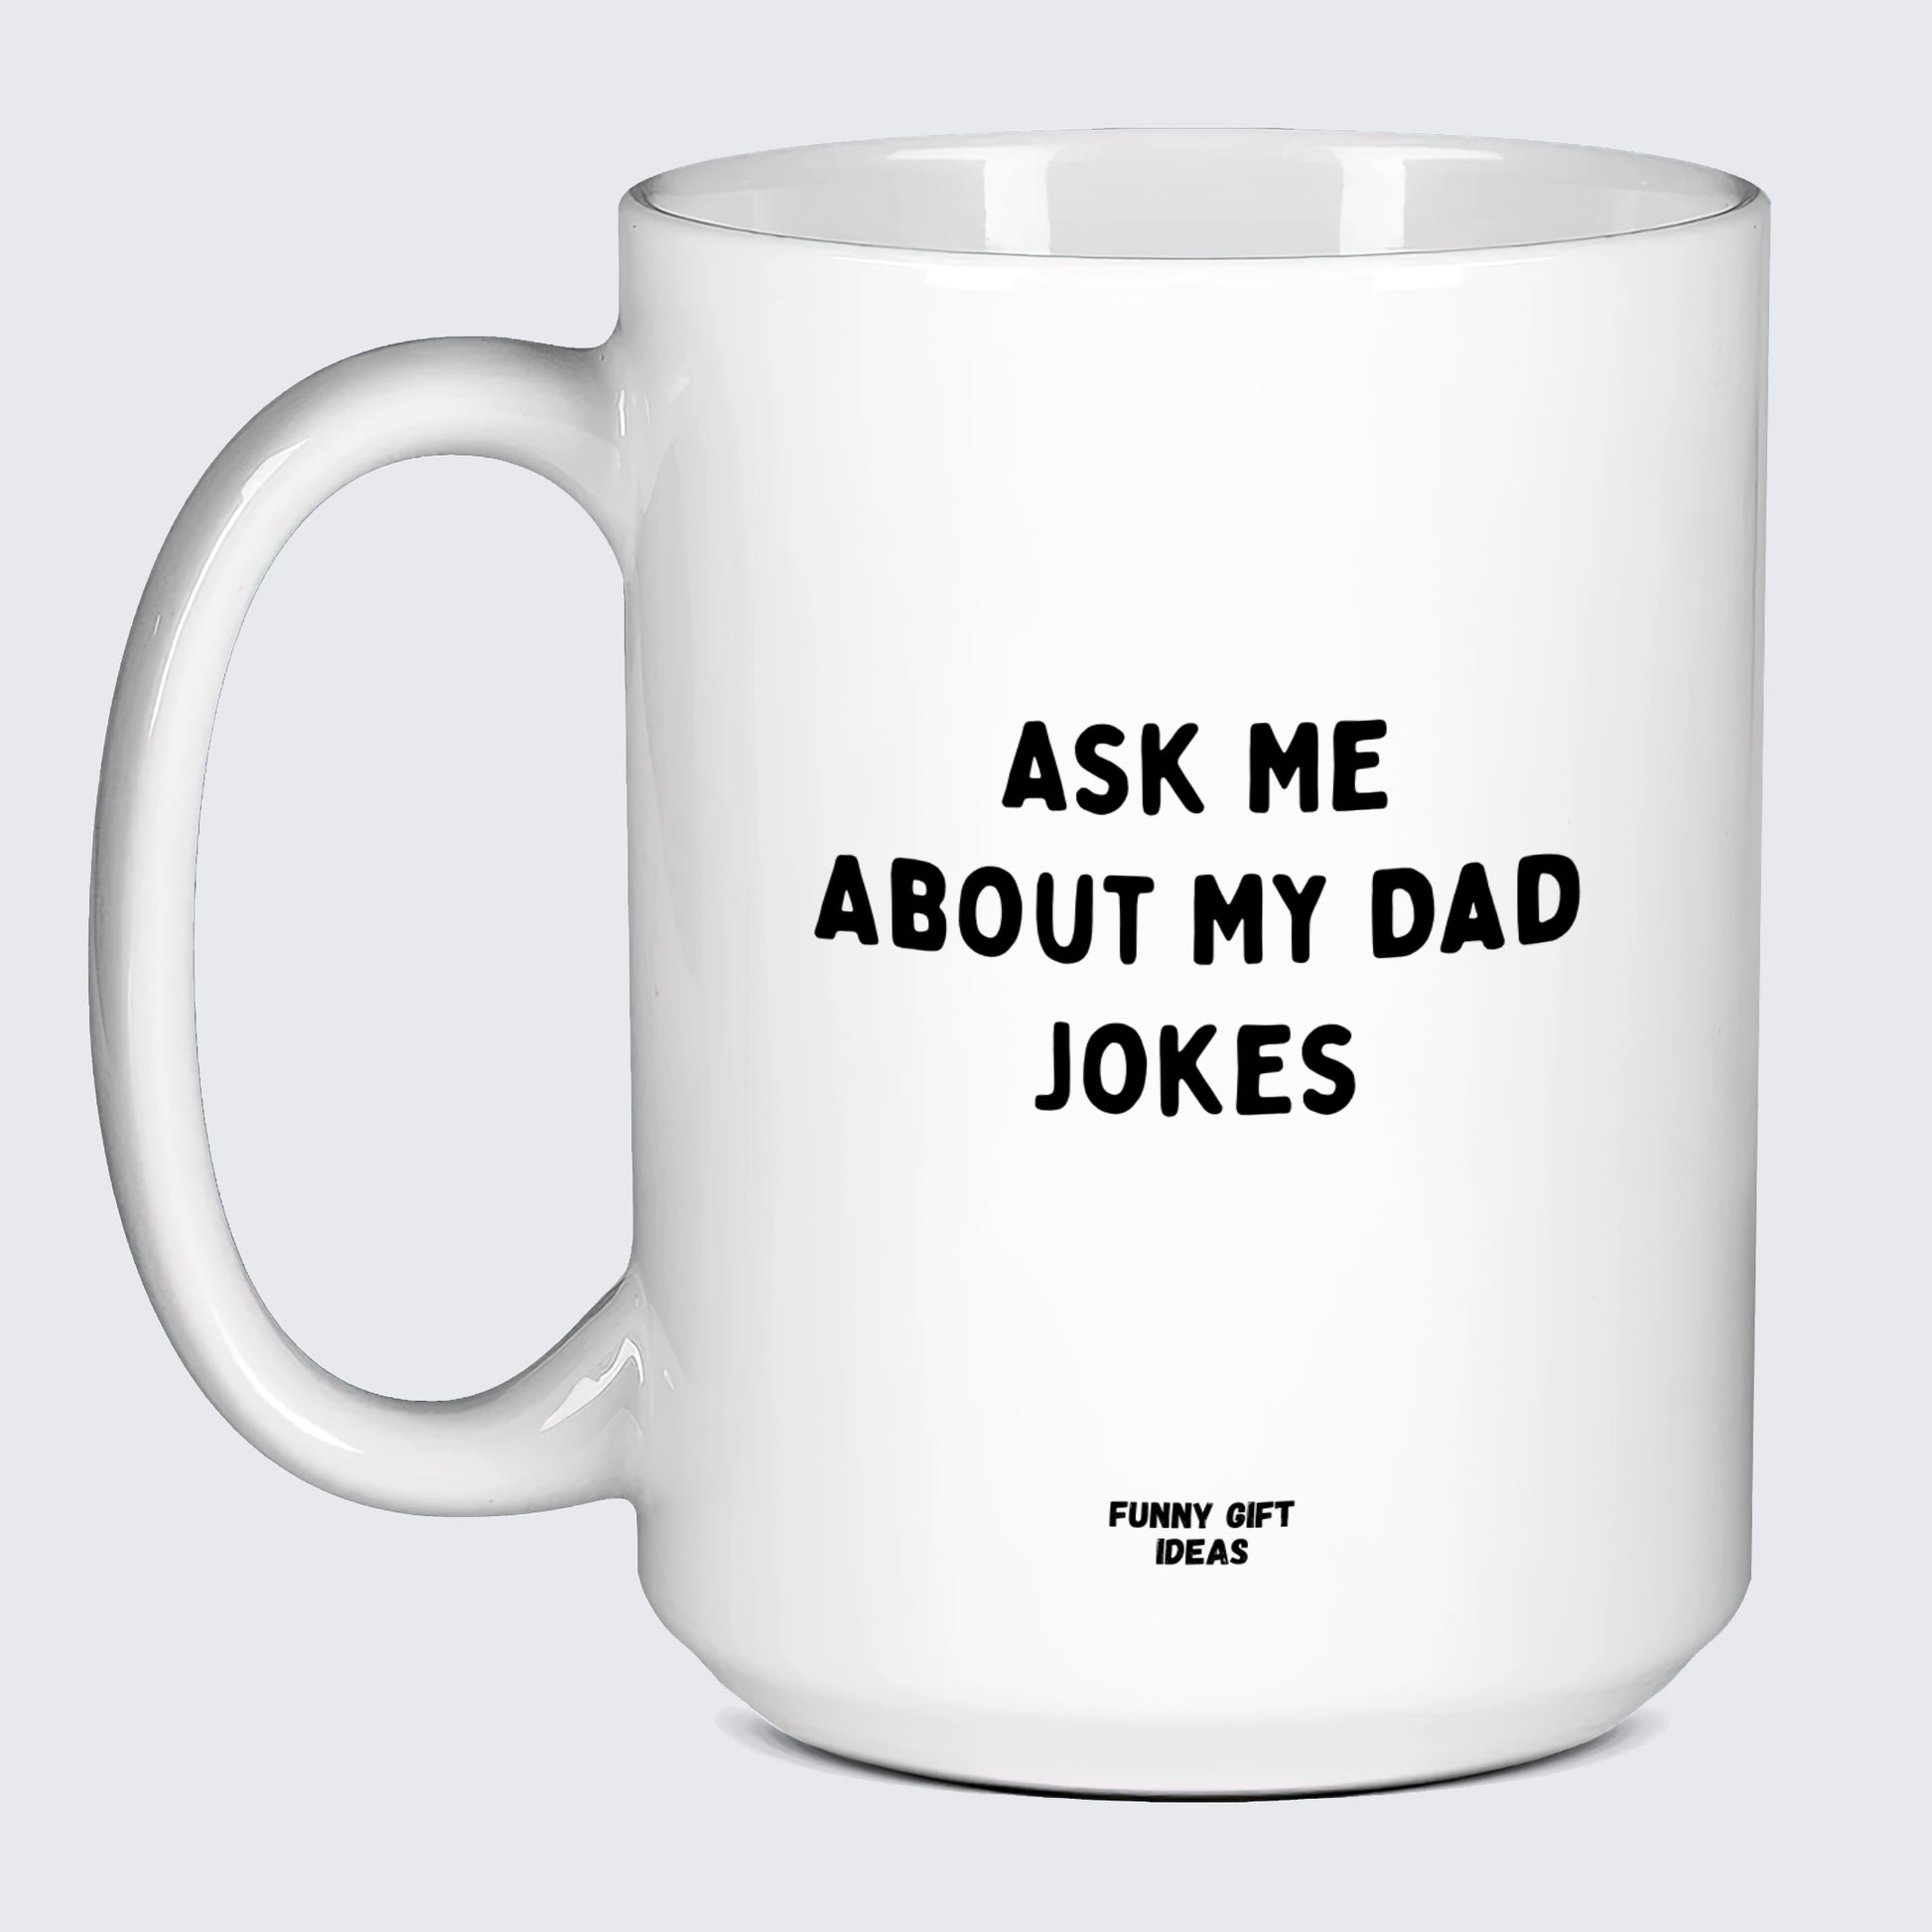 Good Gifts for Dad Ask Me About My Dad Jokes - Funny Gift Ideas